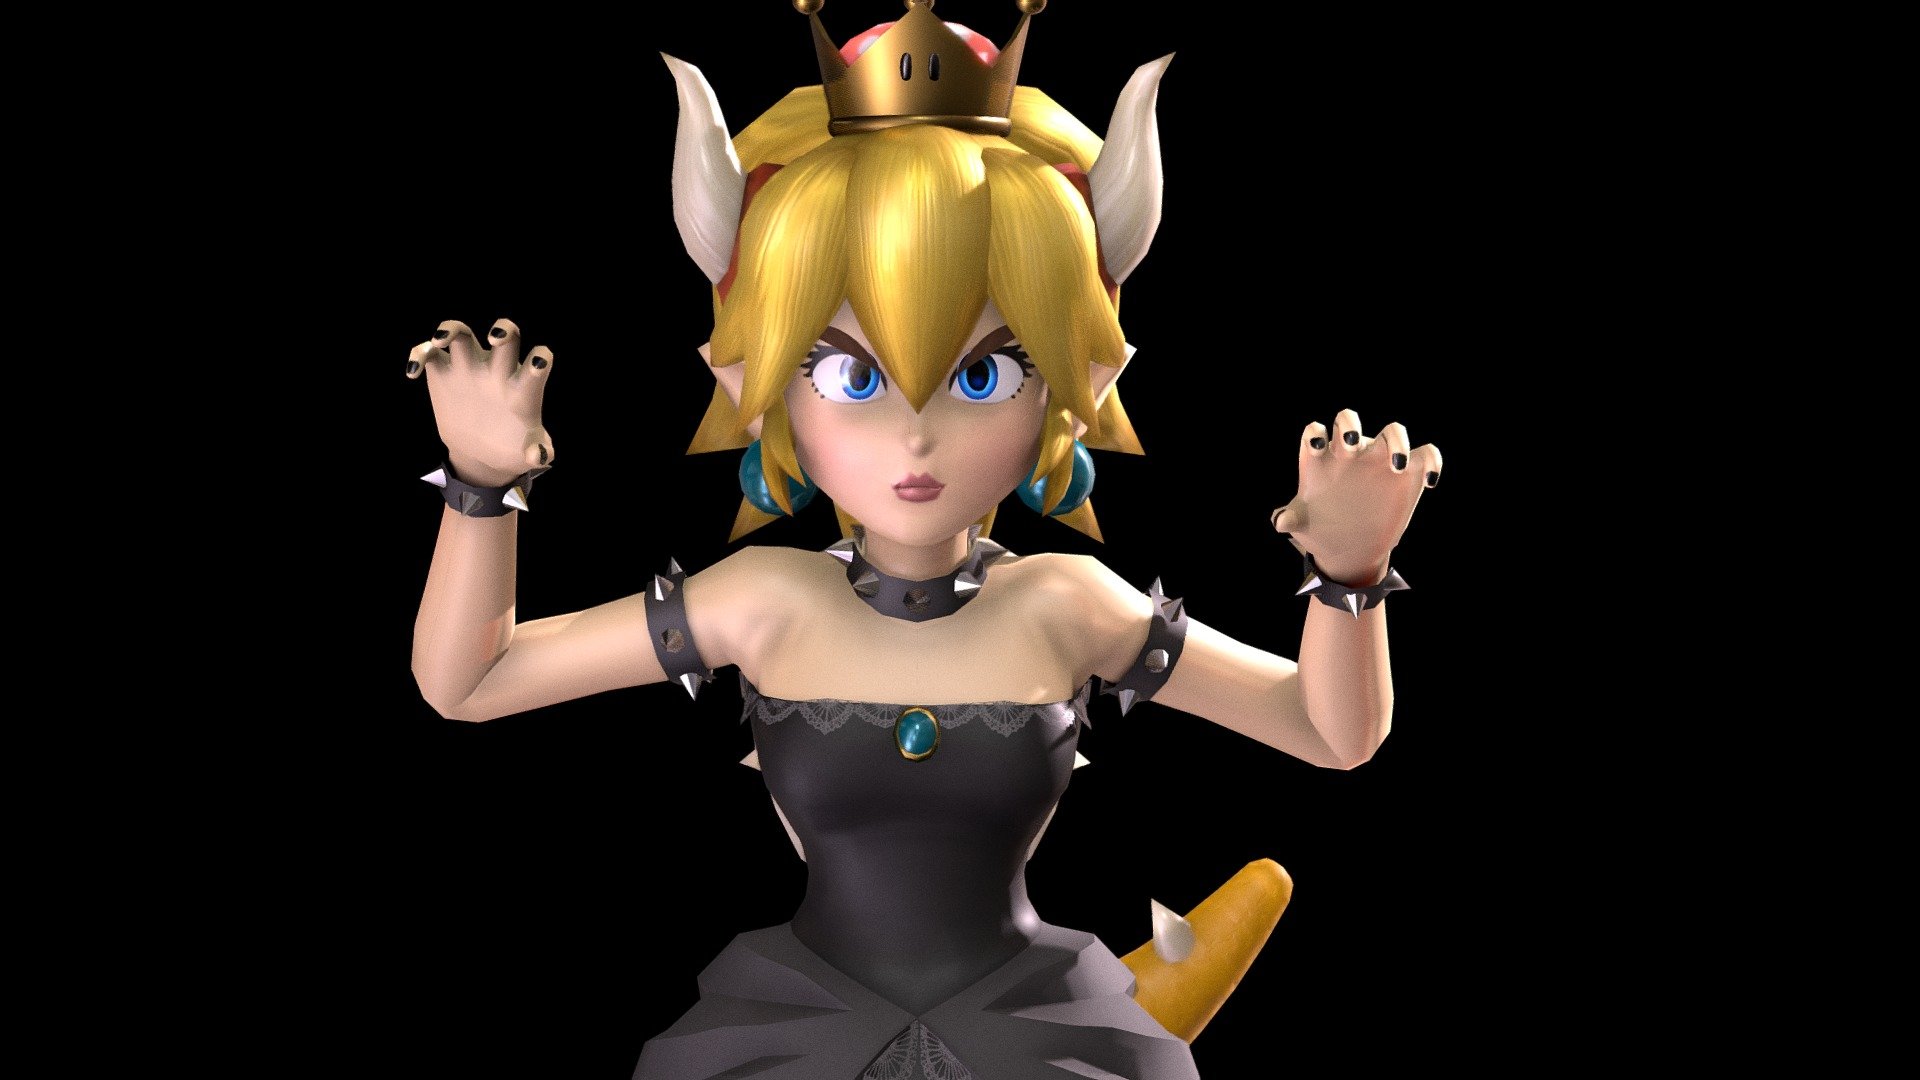 3D model of Bowsette, I tried to make the concept faithful to the Super Smash Bros Ultimate saga. It was modeled, Textured and Rigged in Blender 2.79 (PBR), shaded in Blender 2.8 beta. The rig contains basic IK drivers, controllers for fingers and eyes.

Blend File Containts:
- Character 3d Model
- Accesories 3d Models
- UV Mapping with multiples UV
- PBR Textures (Diffuse, Ambient Oclusion, Metallic, Specular, Roughnnes and Bump).
-Basic Rig with IK controllers.
-5 Poses

FBX File:
- Character 3d Model
- Accesories 3d Models
- UV Mapping with multiples UV
- PBR Textures (Diffuse, Ambient Oclusion, Metallic, Specular, Roughnnes and Bump).
-Basic Rig

Details from Mesh:
Polygons: 5,948
Vertex: 6,034

Contact:
mikeblueg@hotmail.com - Bowsette (Rigged) - Buy Royalty Free 3D model by Mike BlueG (@mikeblueg) 3d model